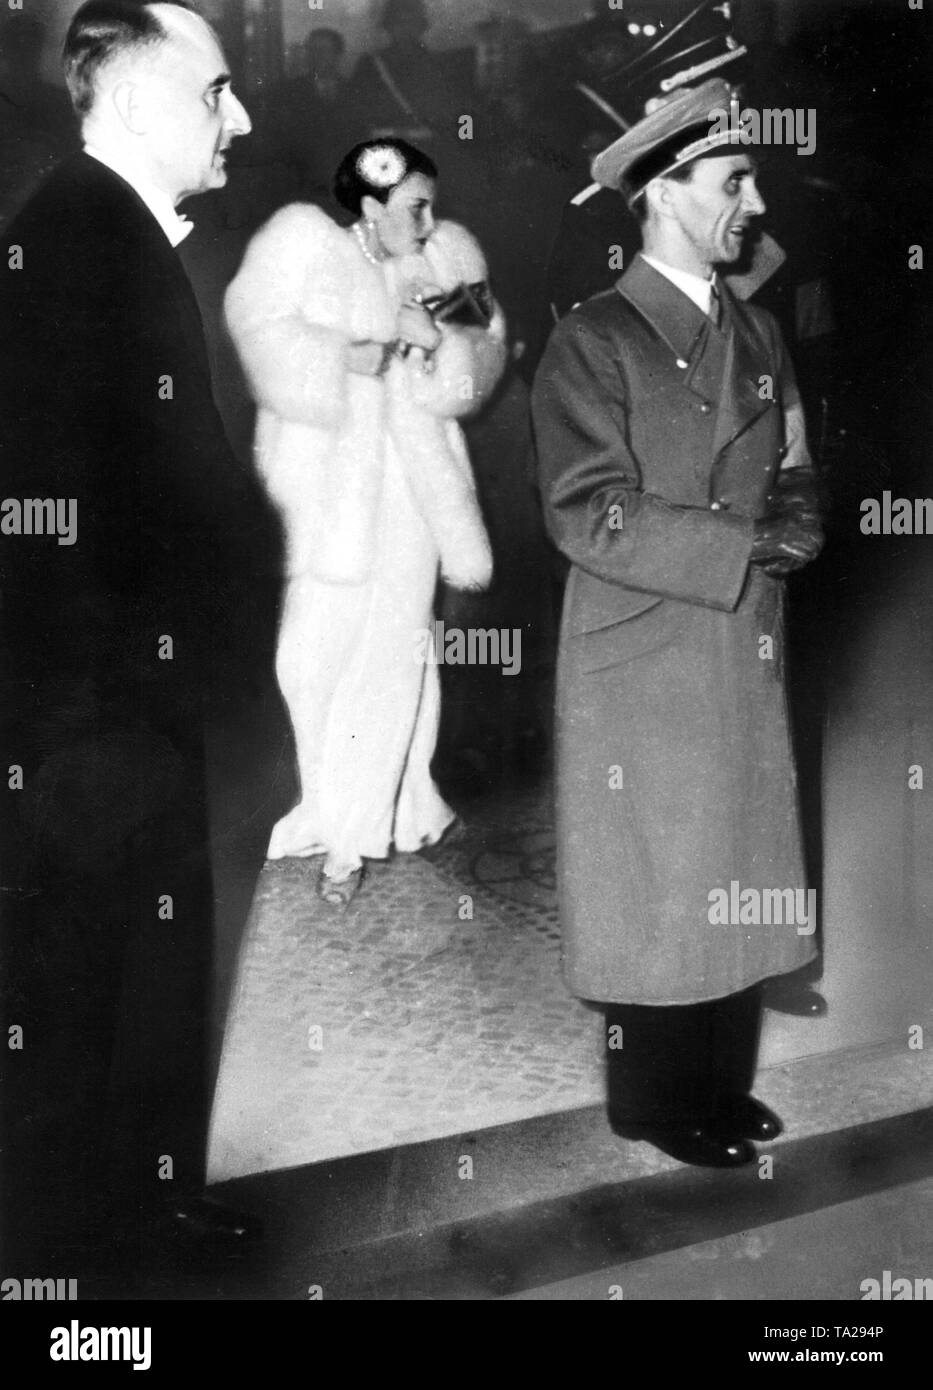 Joseph Goebbels and the film actress Lida Baarova as guests at the premiere of 'Olympia' by Leni Riefenstahl in Berlin in 1936. Stock Photo